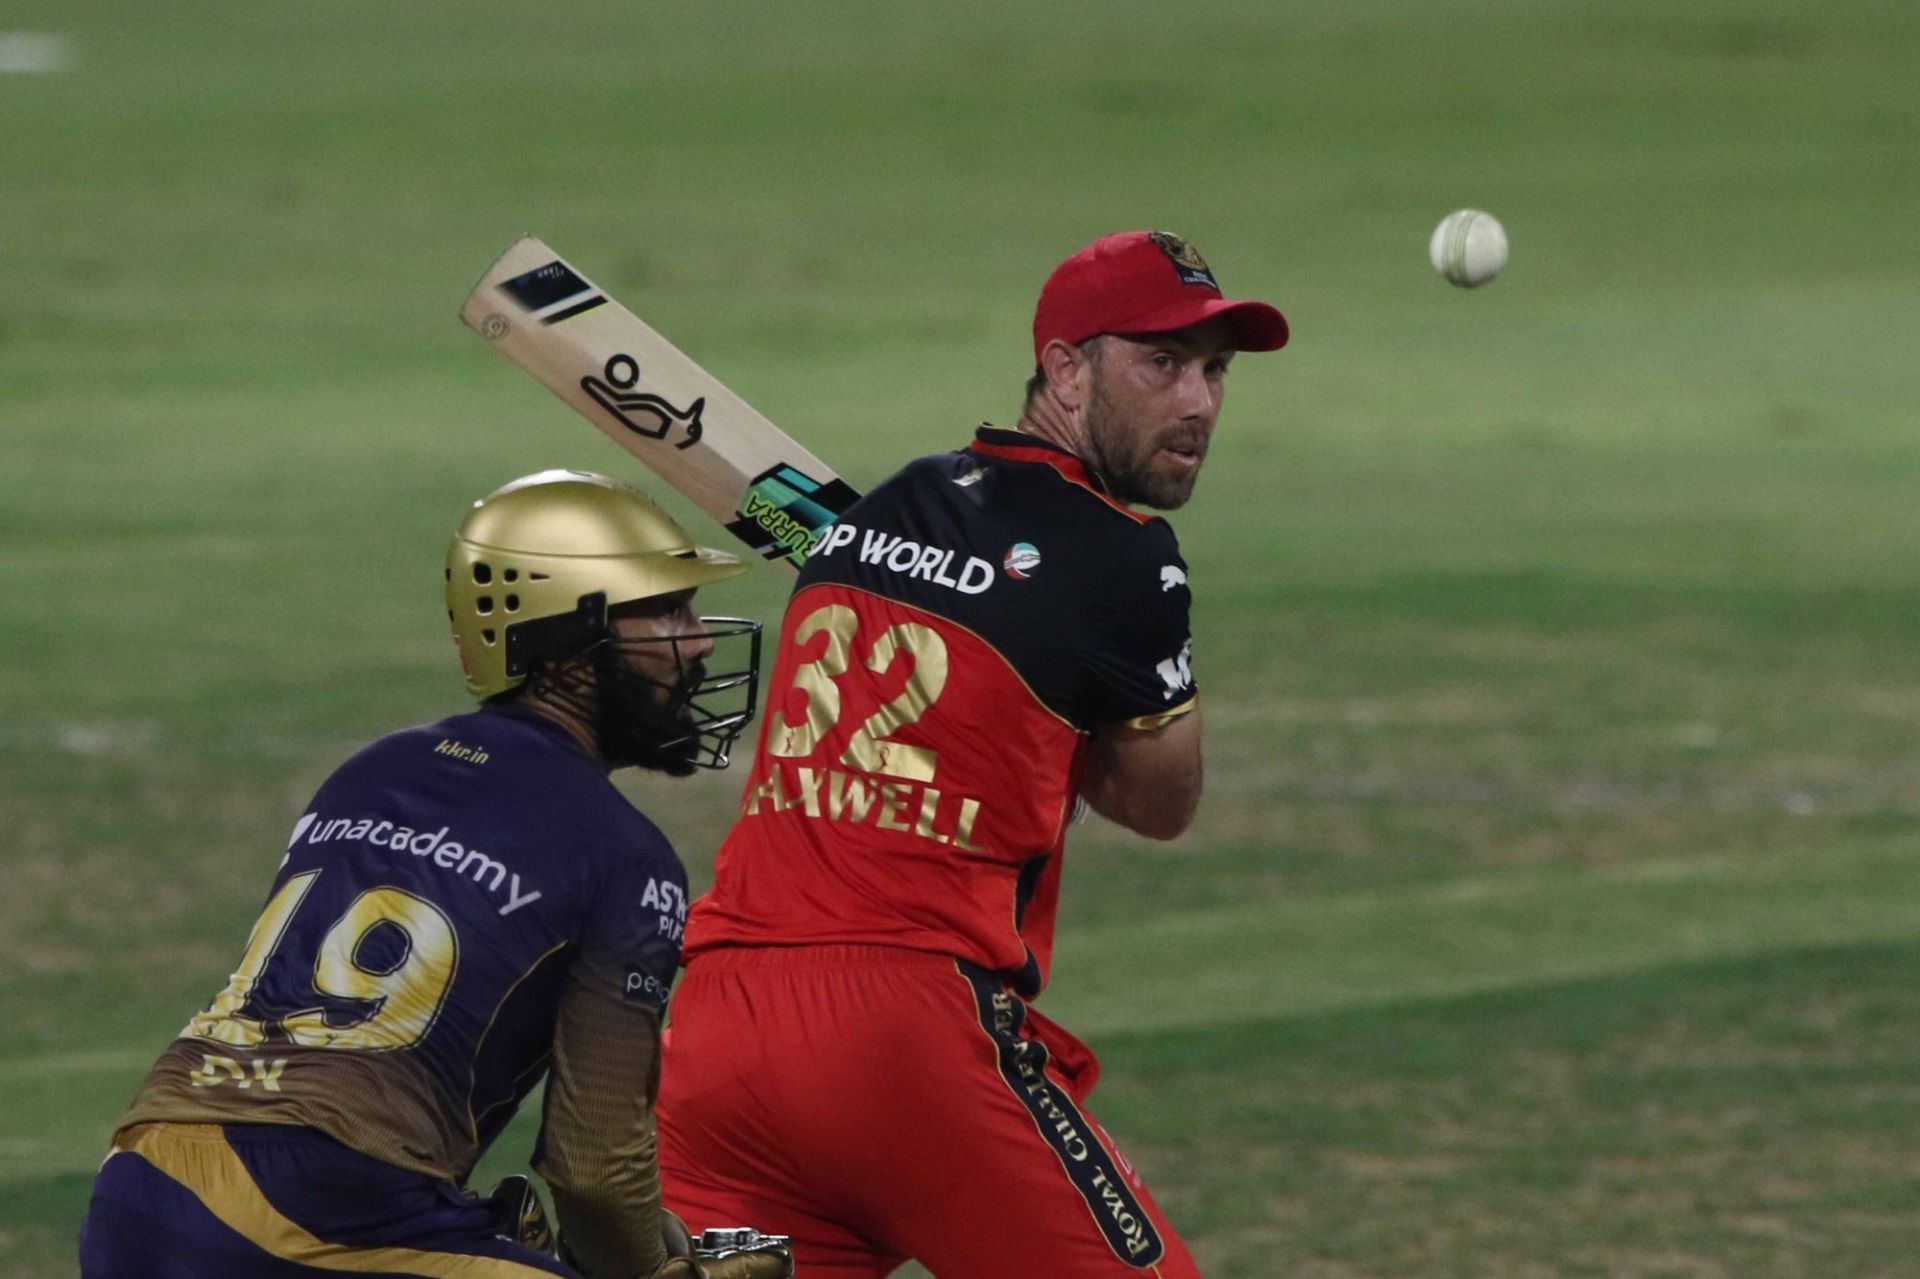 Glenn Maxwell was very consistent for Royal Challengers Bangalore in IPL 2021 (Image Courtesy: IPLT20.com)